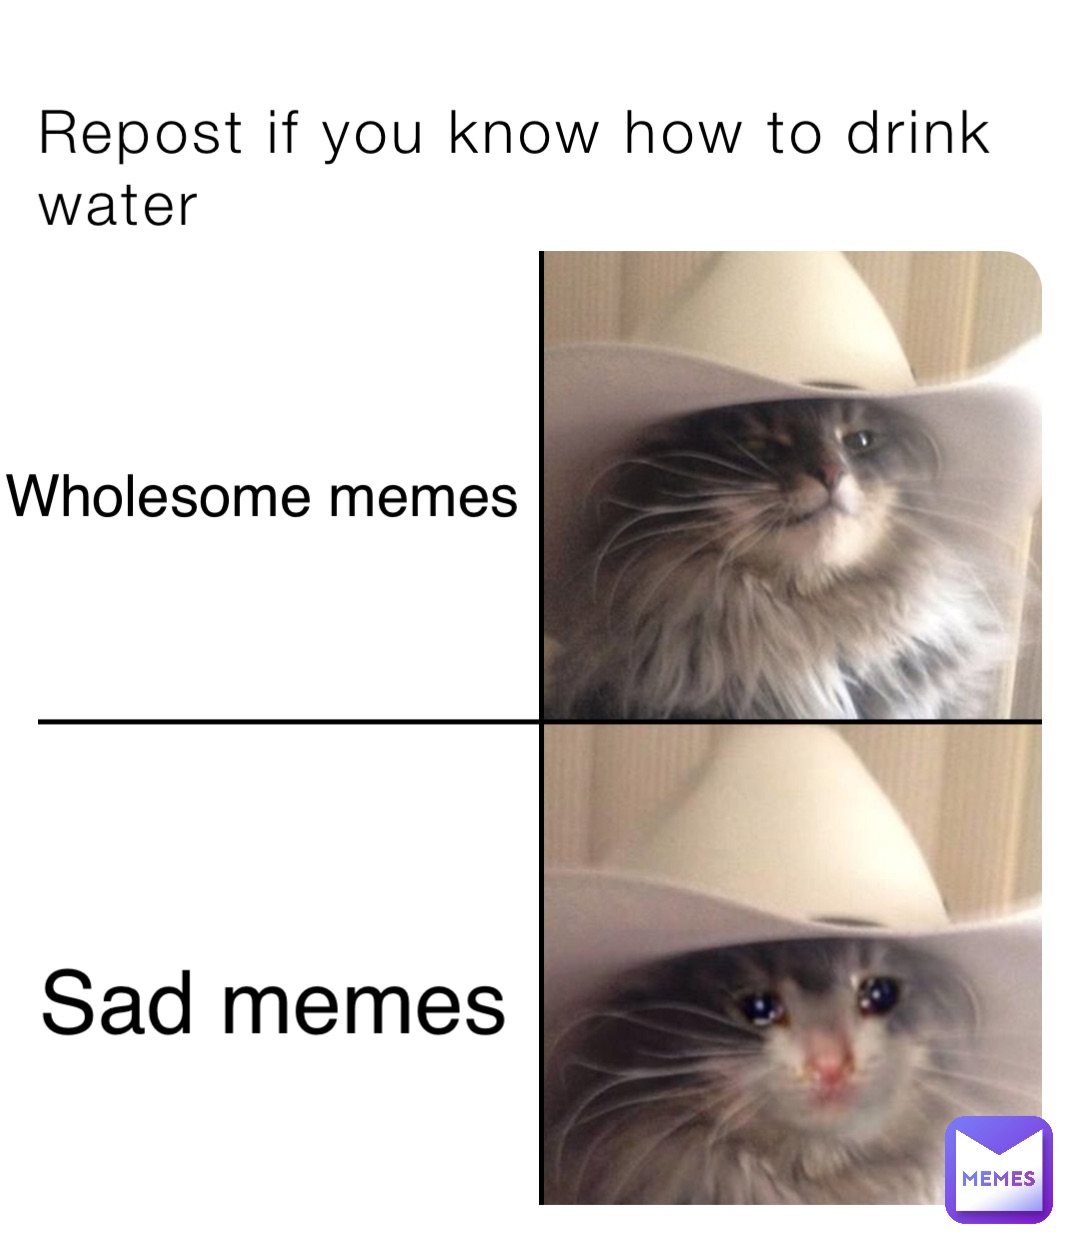 Repost if you know how to drink water Wholesome memes Sad memes